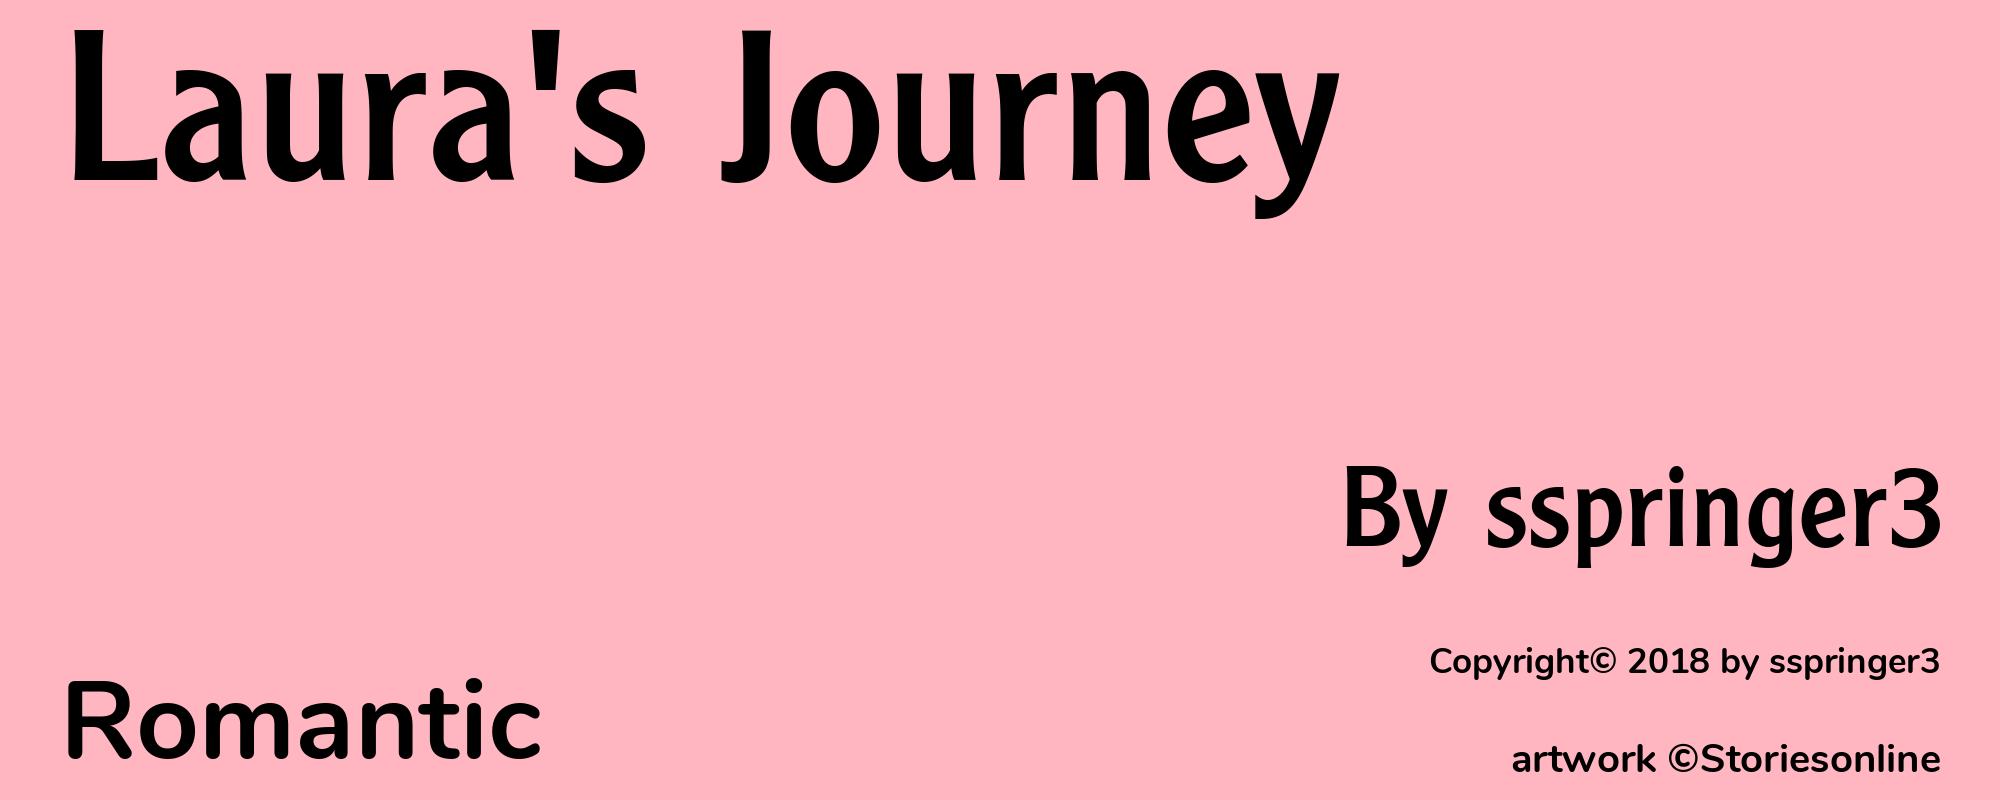 Laura's Journey - Cover